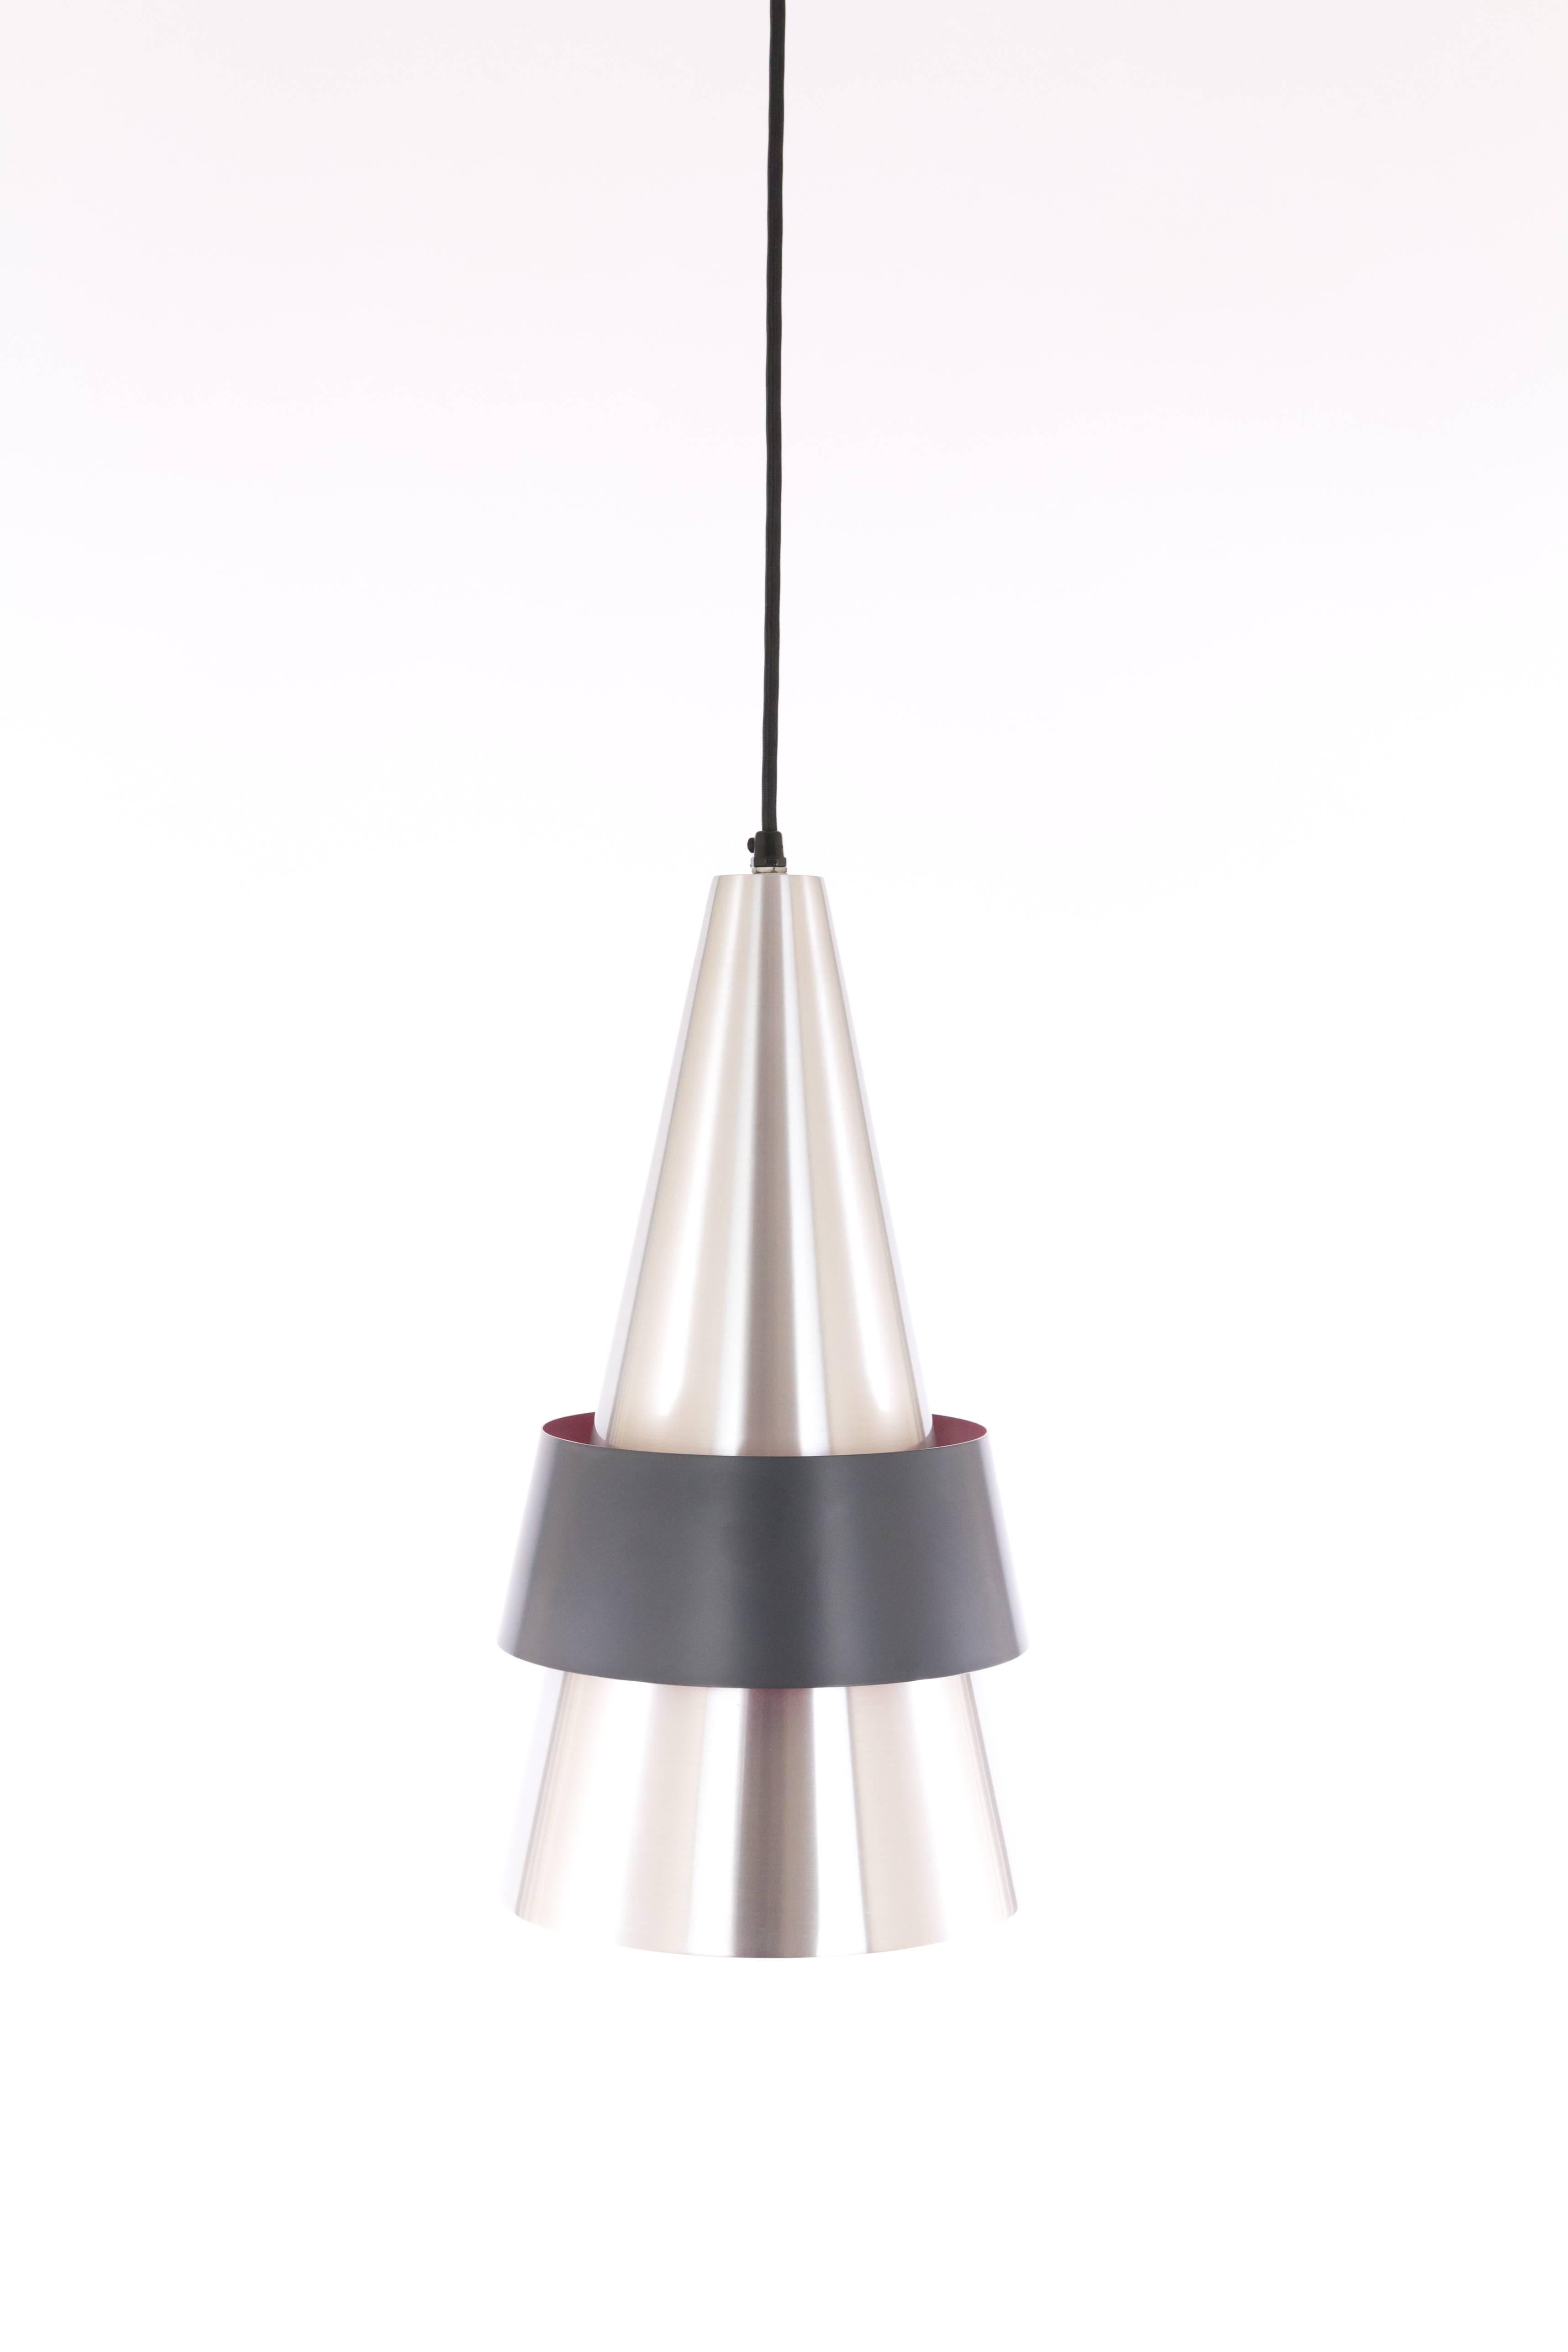 Pendant designed in the early 1960s by famous Danish designer Jo Hammerborg. Corona was one of his earlier designs for Fog & Mørup.

The cone of solid satin aluminium consists of two parts and is held together by a black lacquered band. The inside